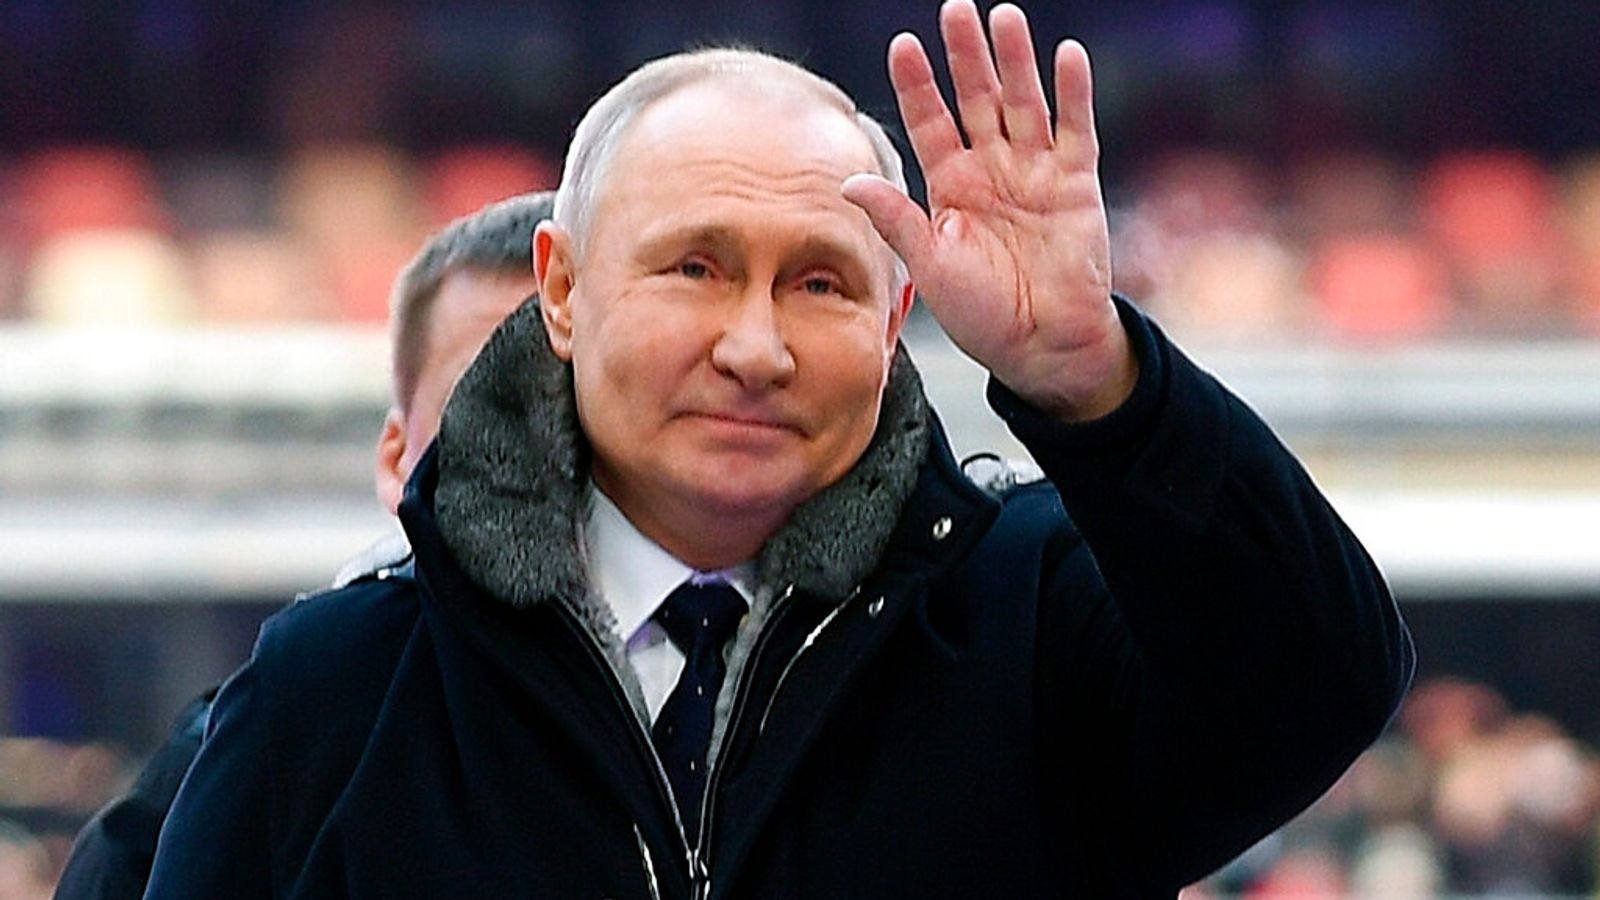 State-controlled media amplifies Putin's image as a patriotic leader (Credits: Welcome Qatar)